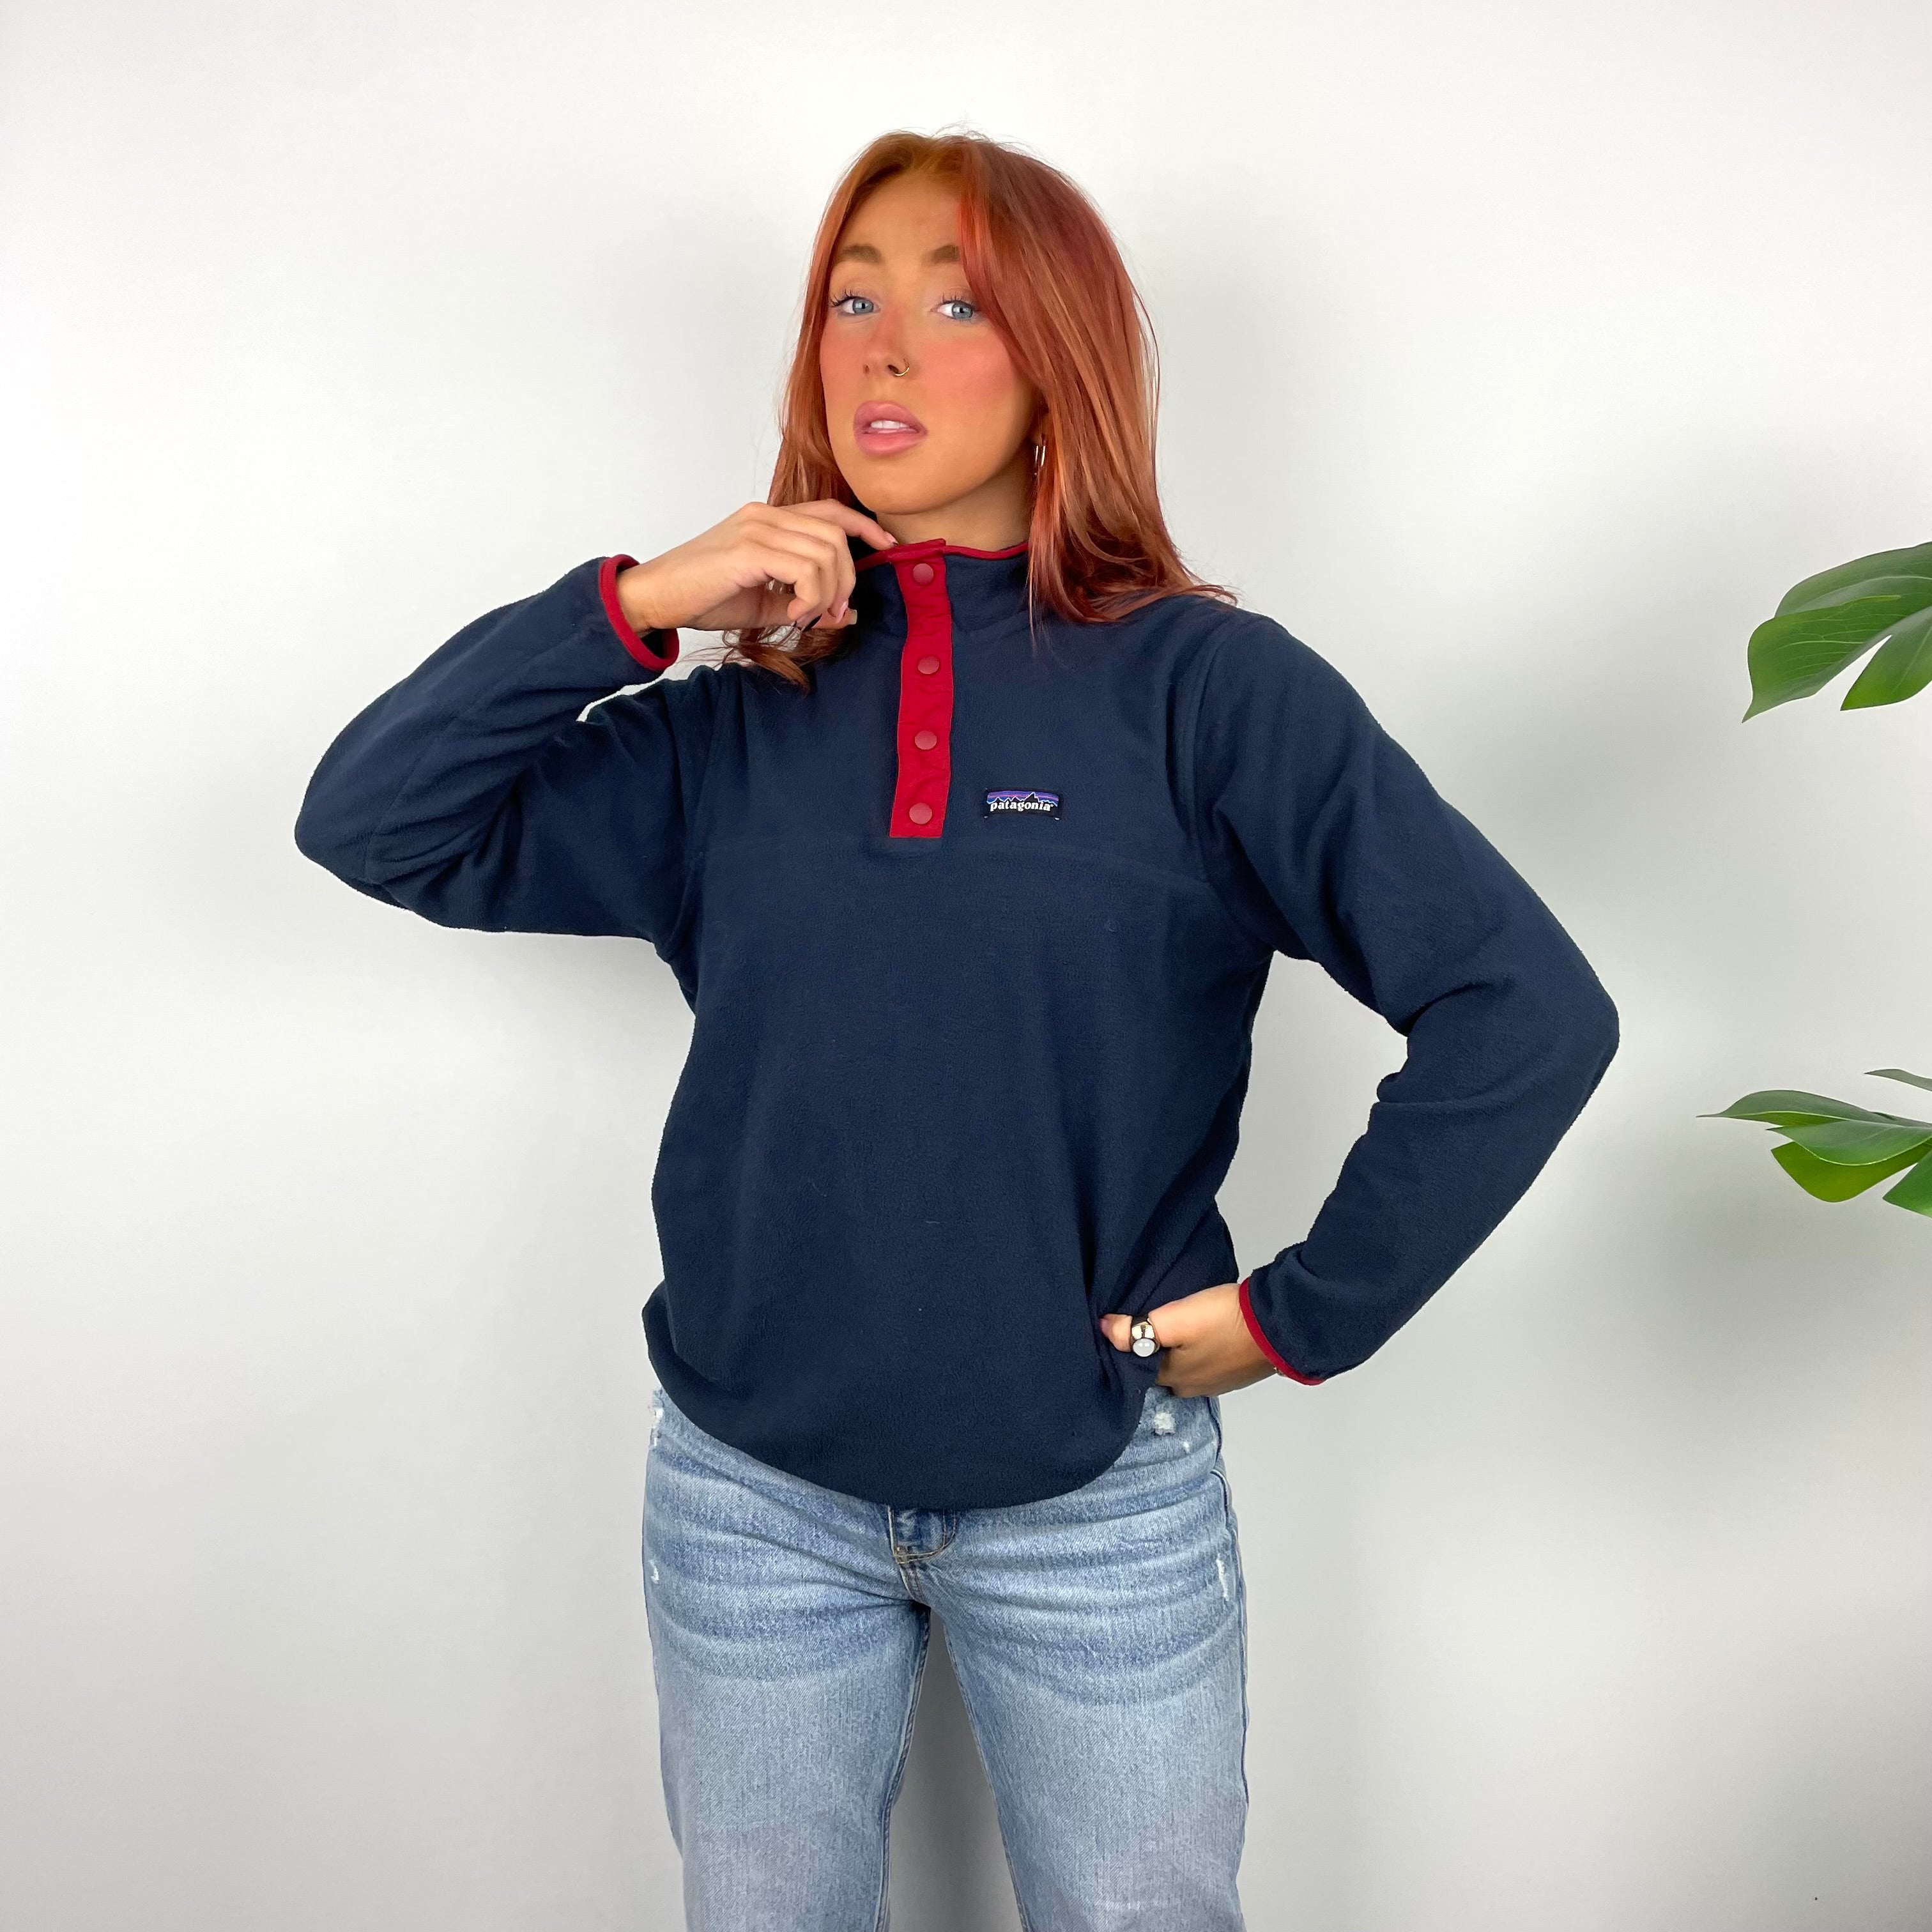 Patagonia RARE Navy Embroidered Spell Out Teddy Bear Fleece Button Sweatshirt (S)